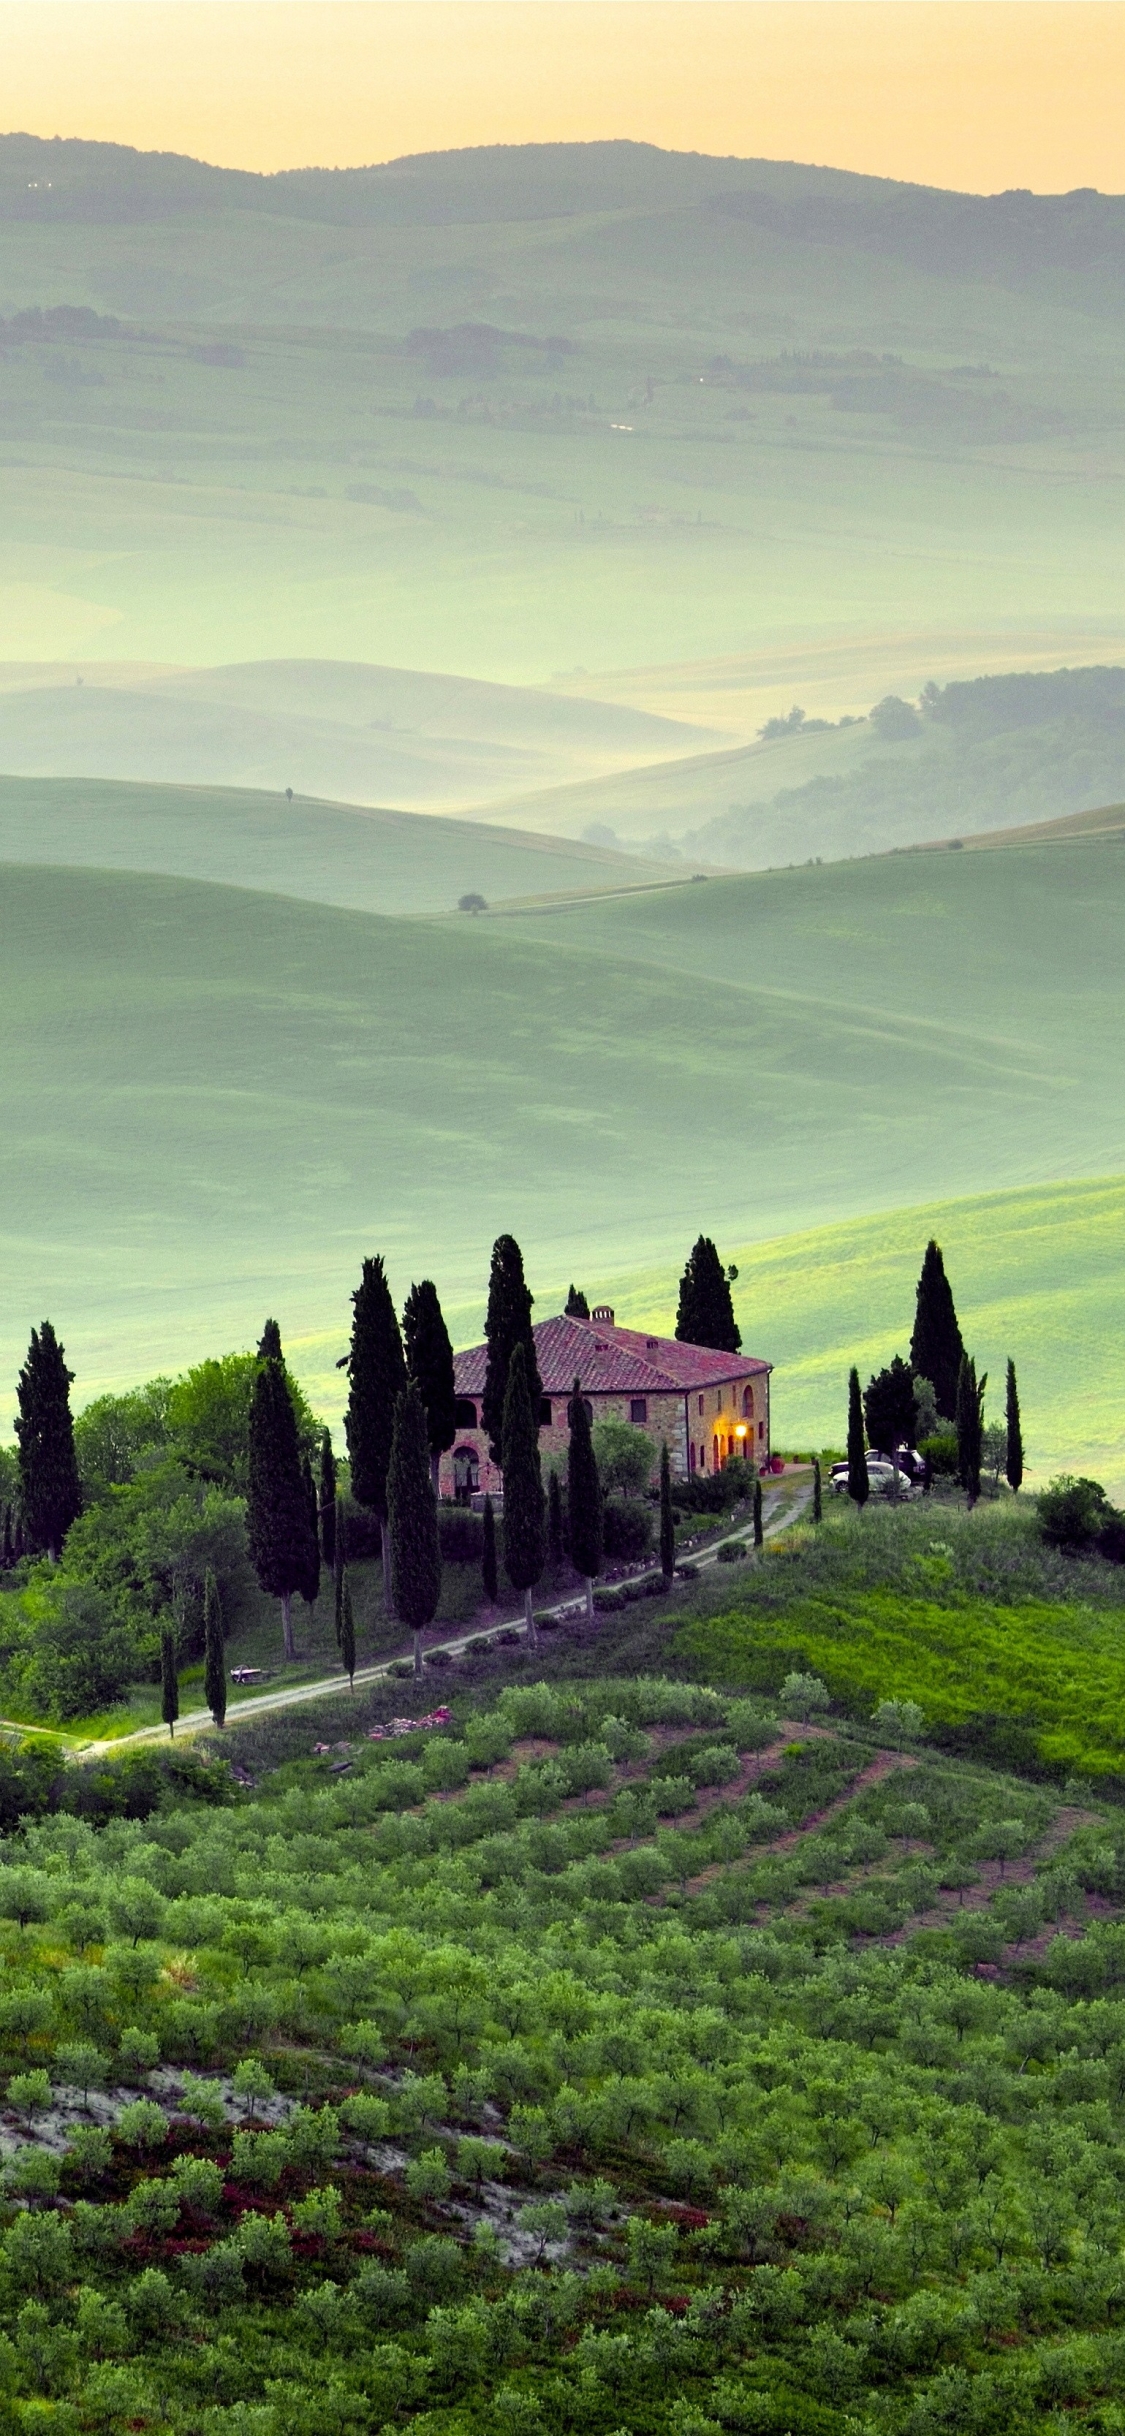 Mansion in the Hills of Tuscany, Italy